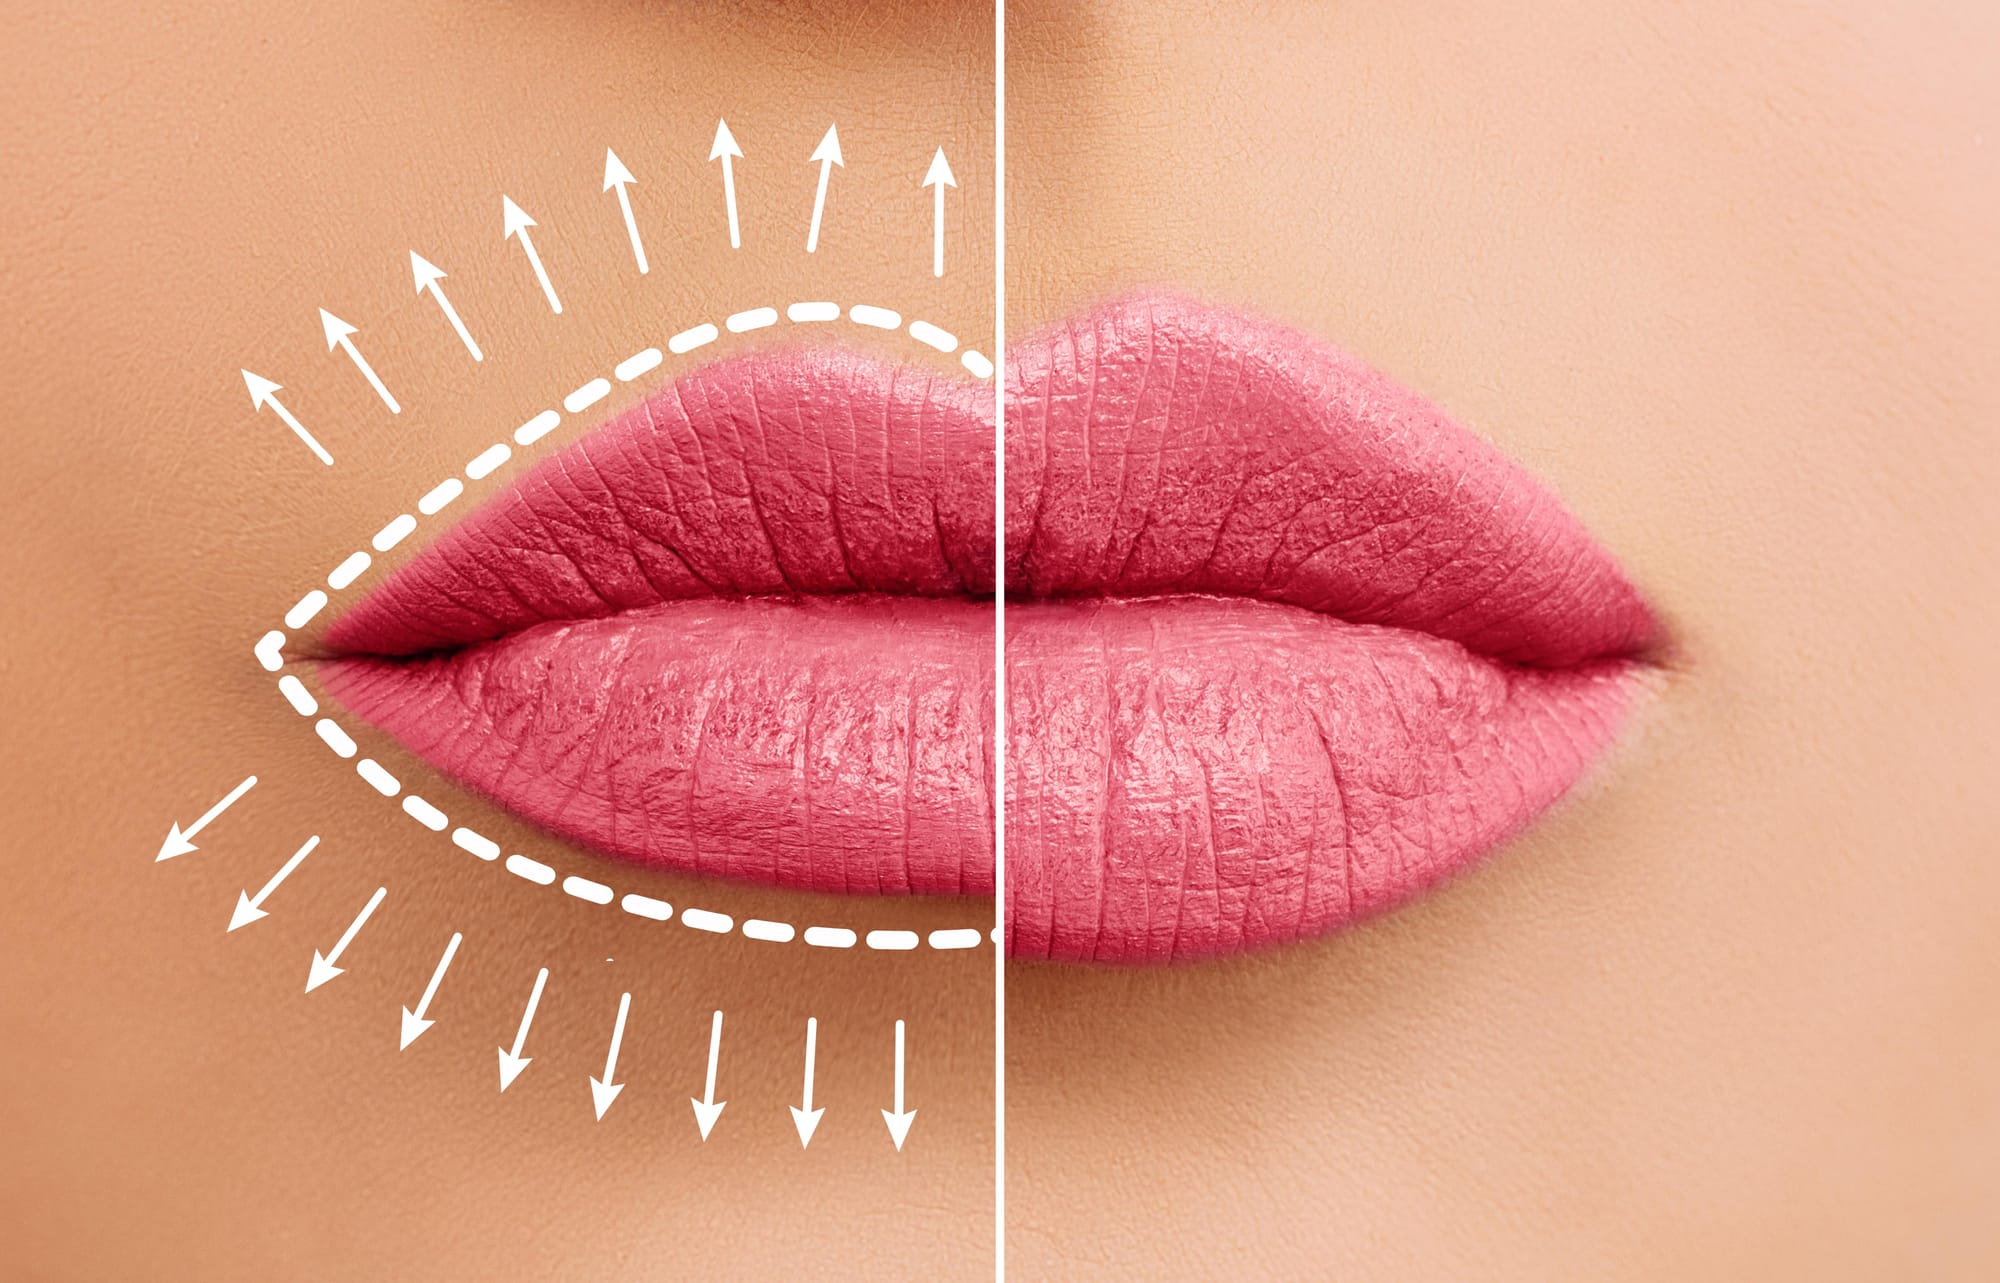 Lip Filler Swelling Timeline: What to Expect and Aftercare